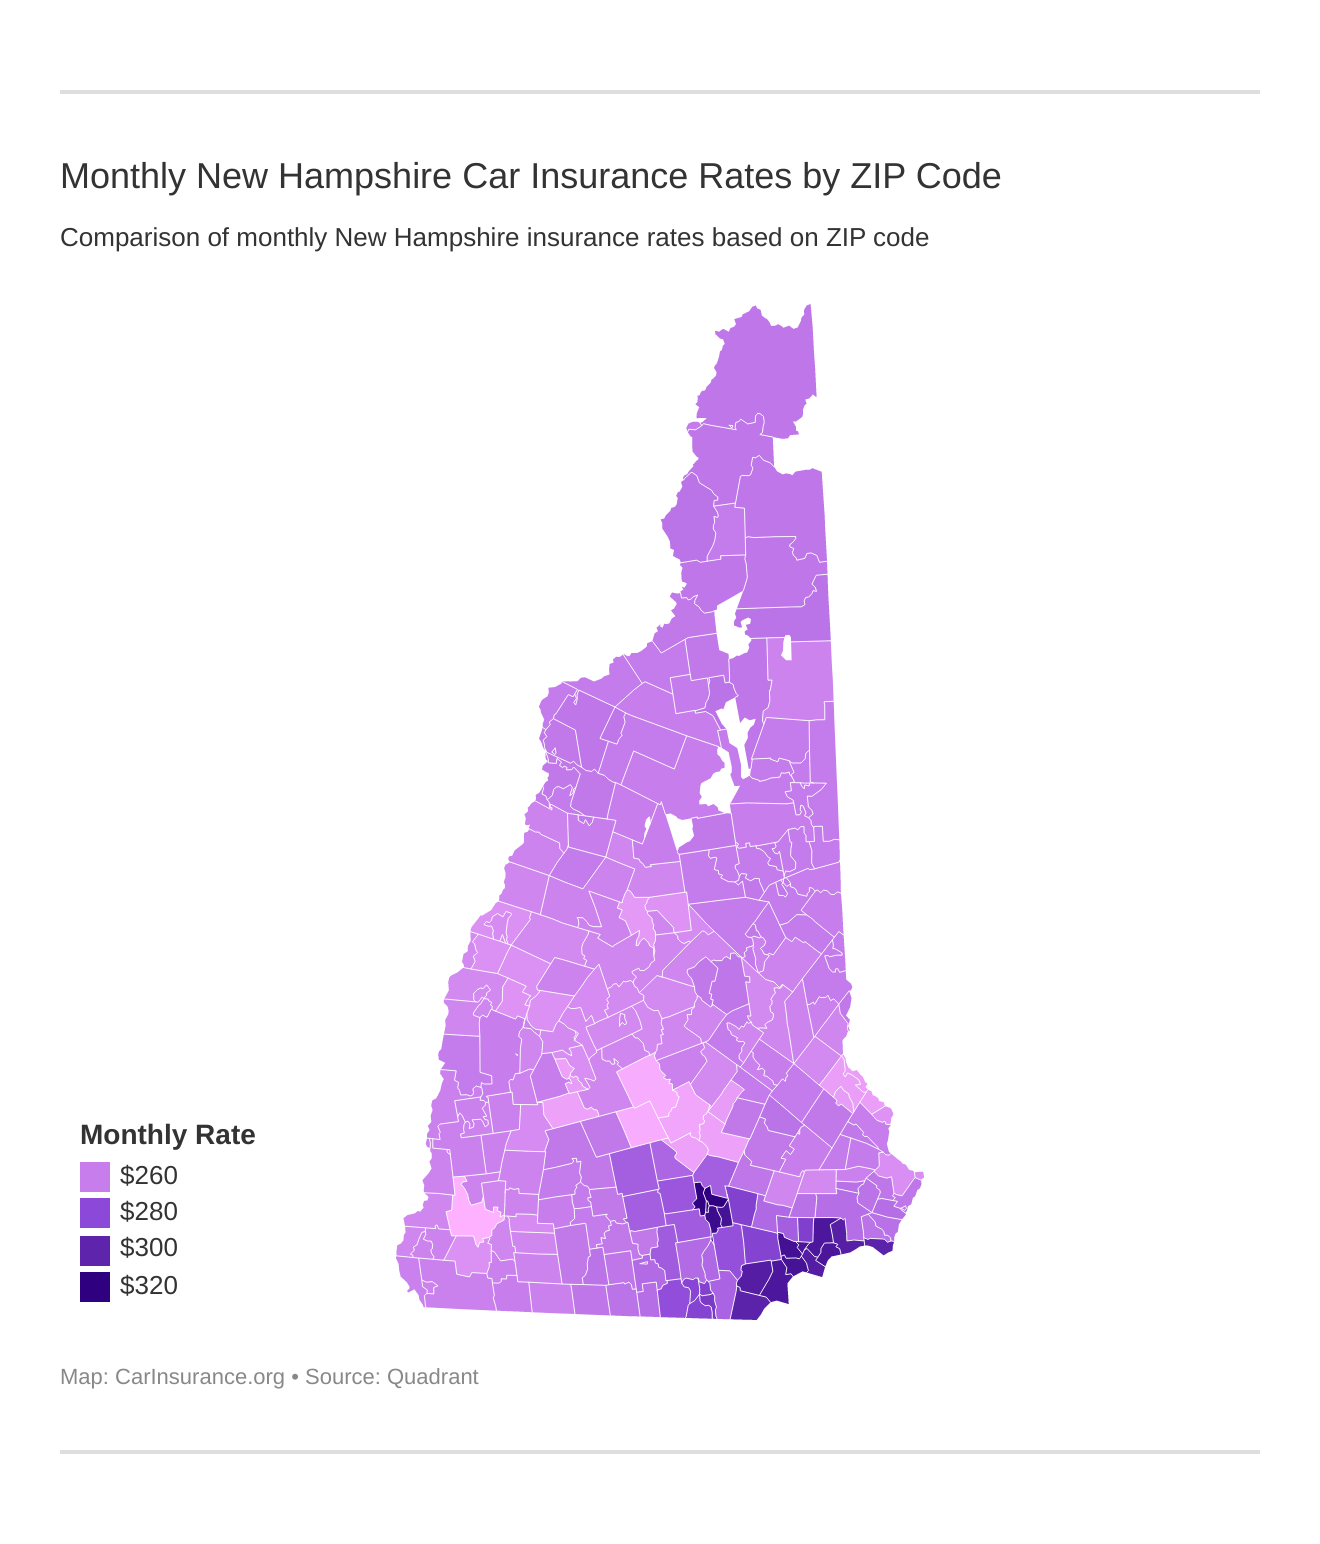 Monthly New Hampshire Car Insurance Rates by ZIP Code